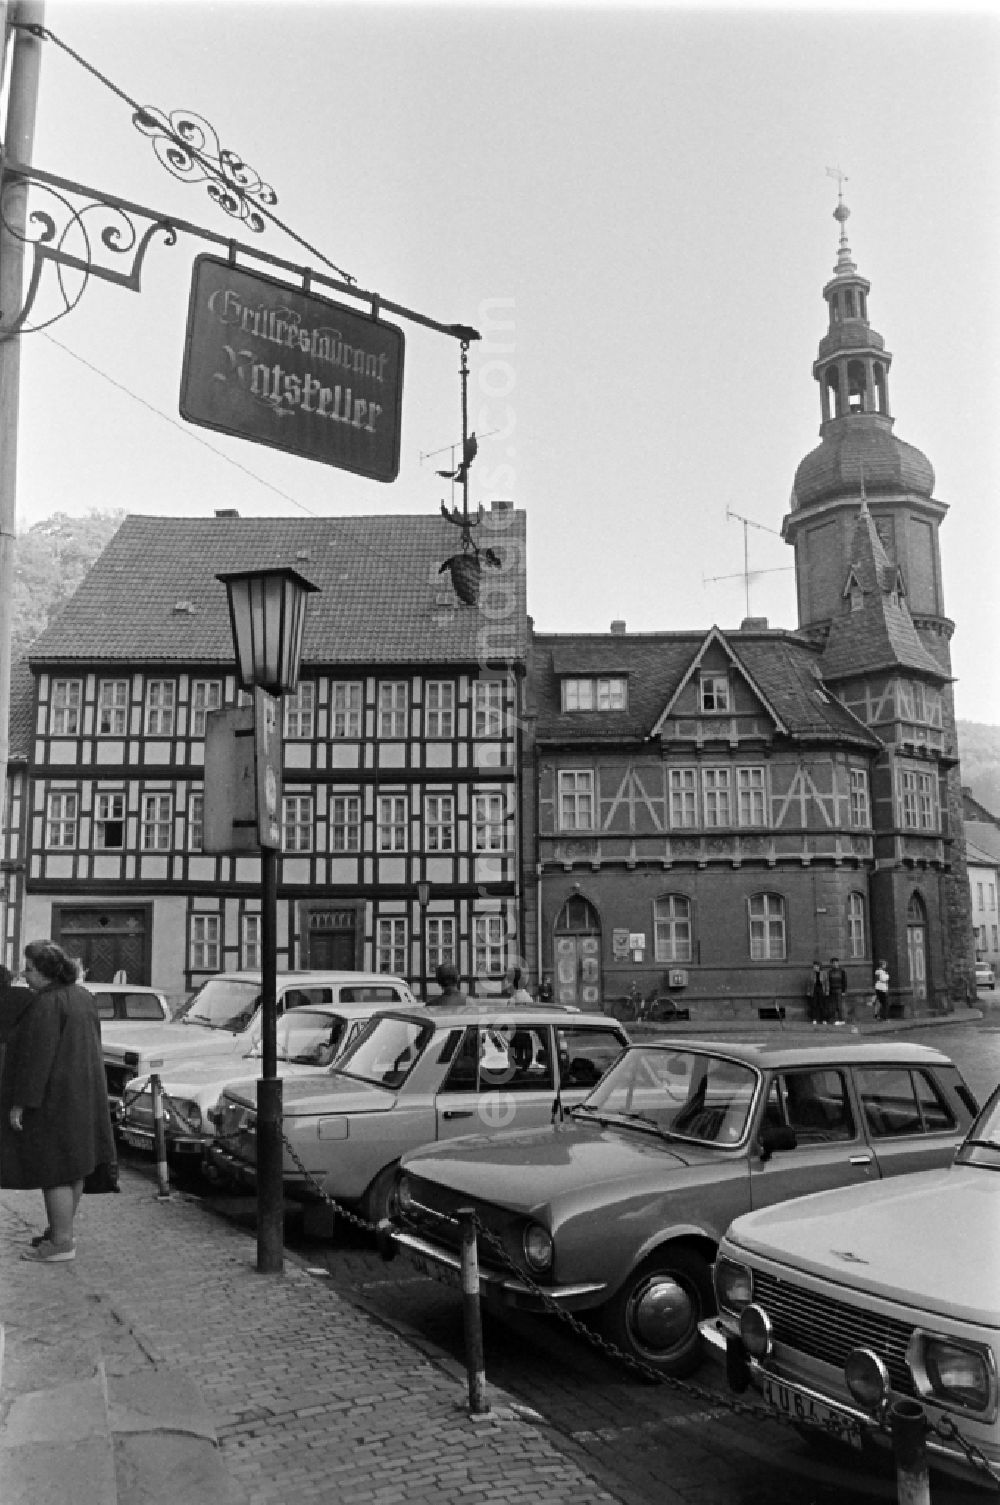 GDR photo archive: Südharz - Cars parked at the corner of Markt and Rittergasse, in the background the Seigerturm in Stolberg (Harz) in the southern Harz region in the federal state of Saxony-Anhalt in the territory of the former GDR, German Democratic Republic. A sign with the inscription Grillrestaurant Ratskeller rises above the pavement